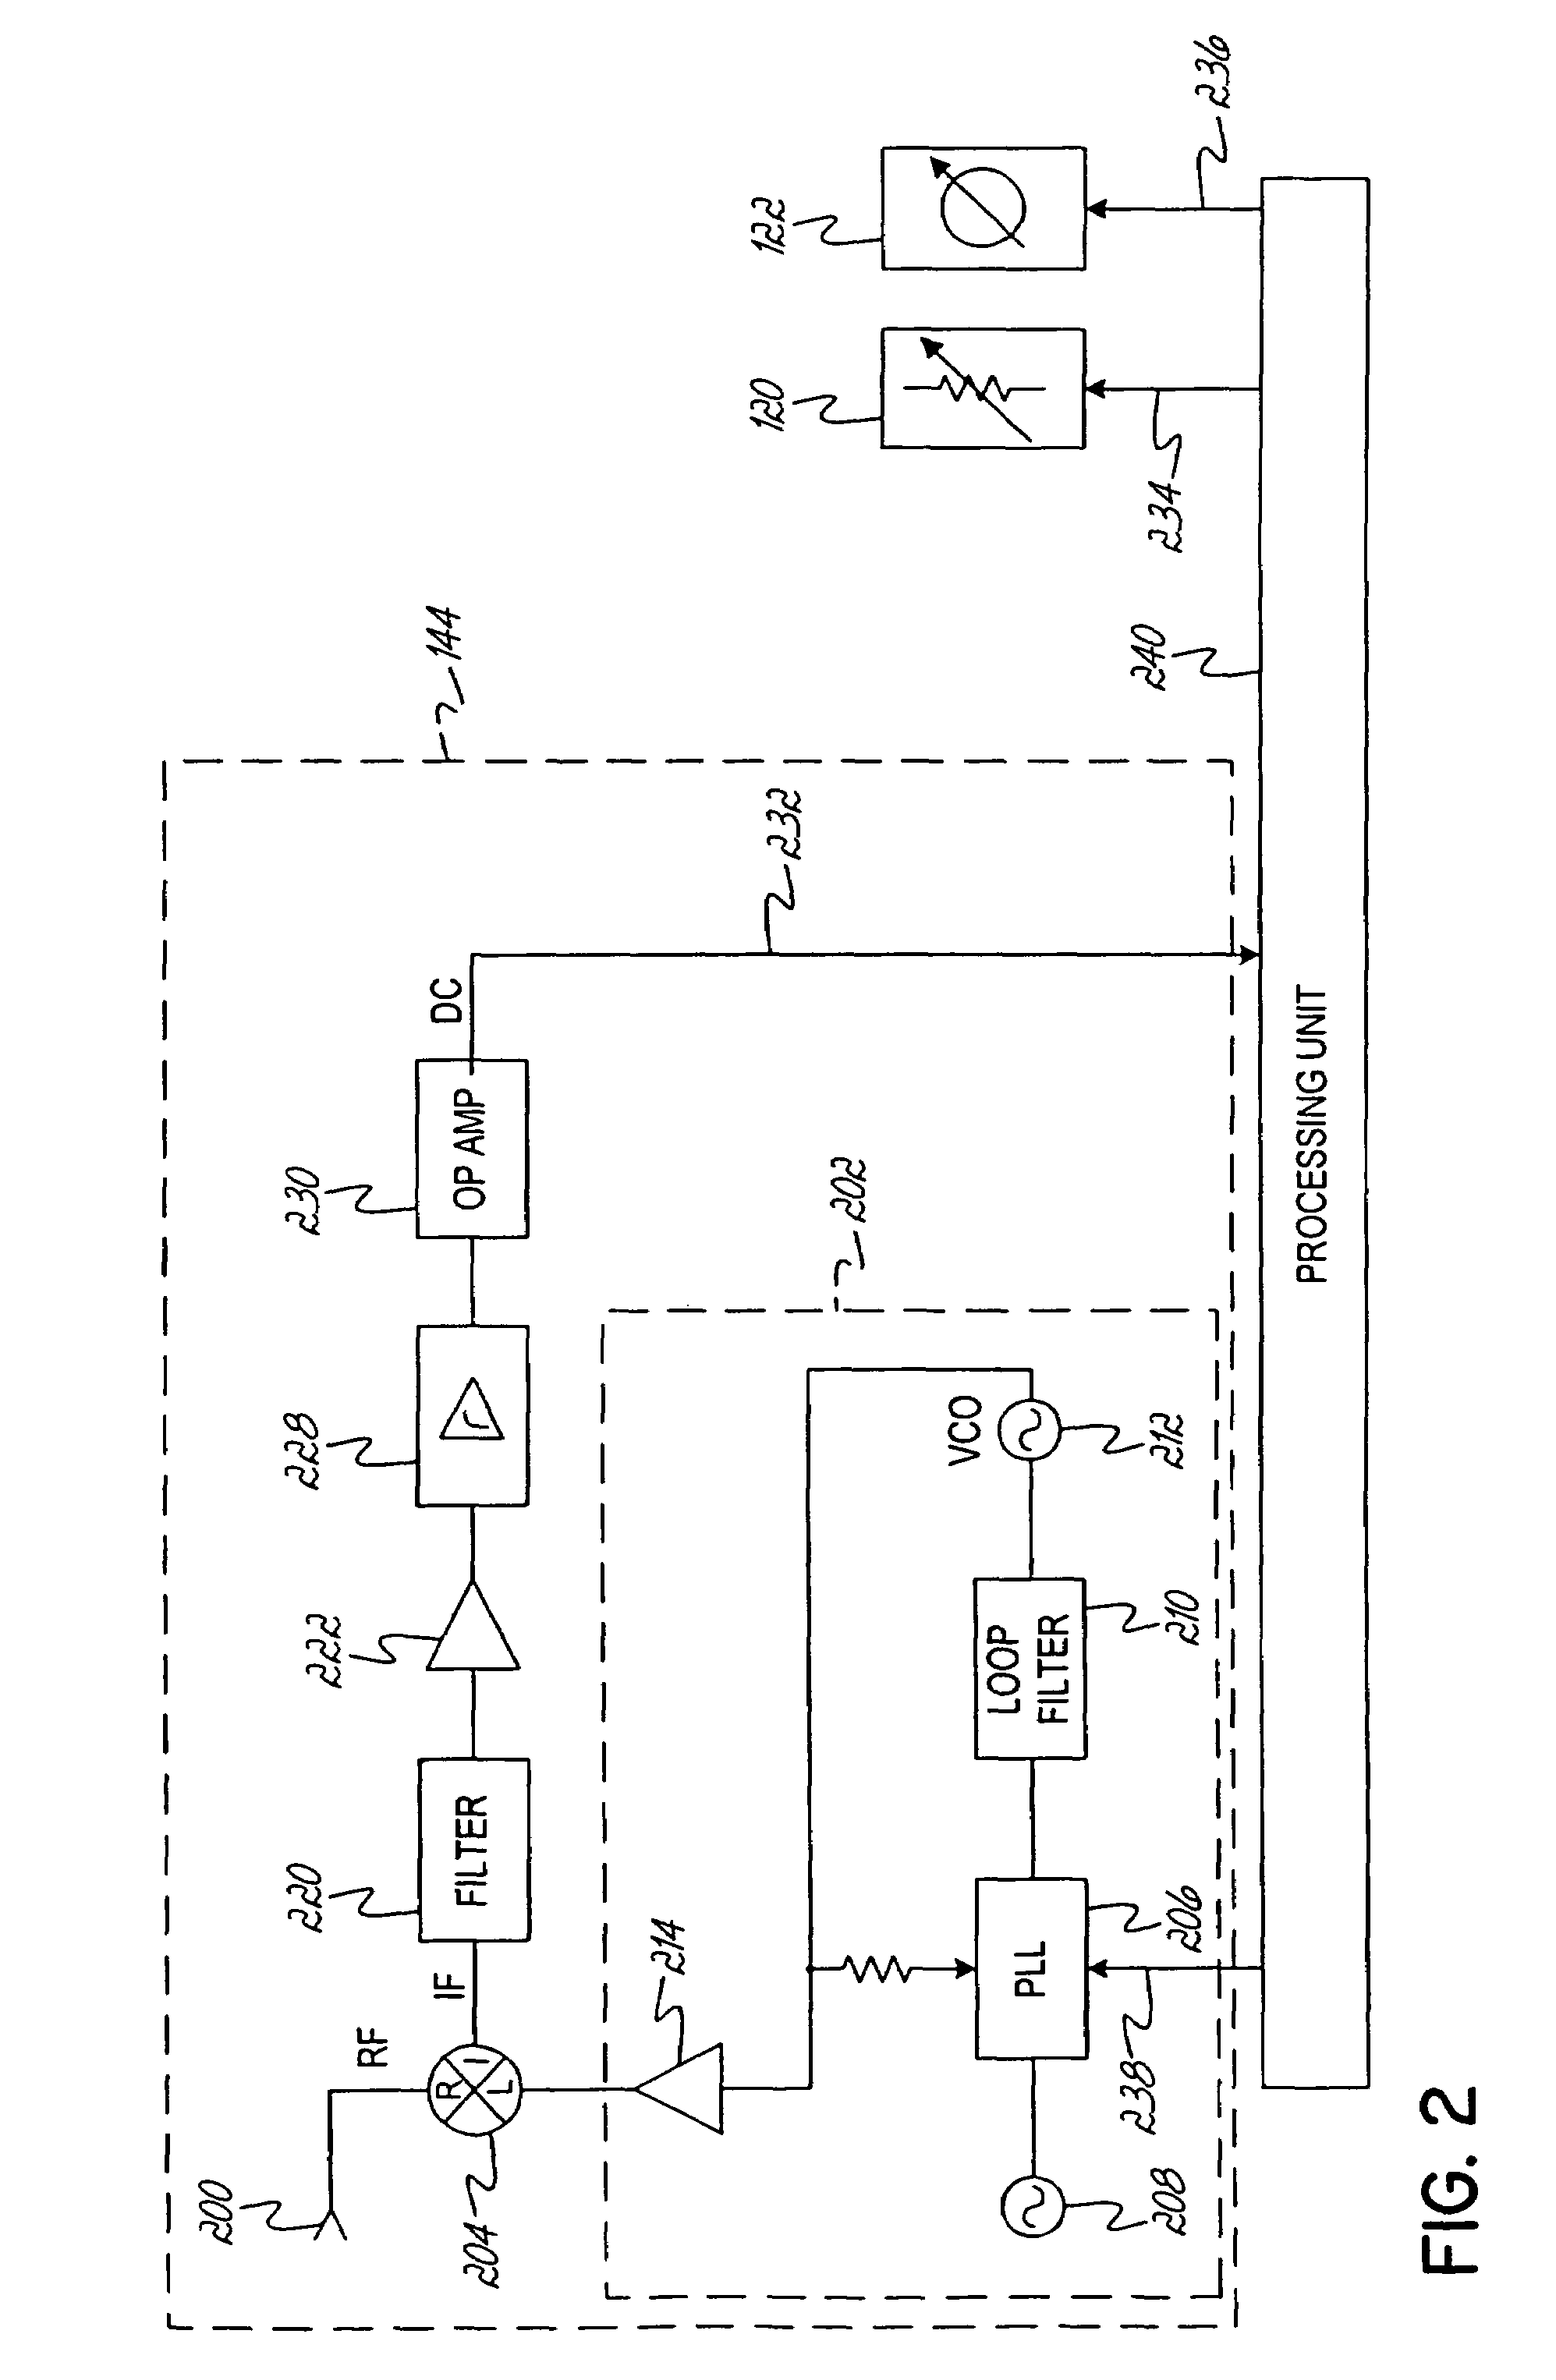 Scanning receiver for use in power amplifier linearization